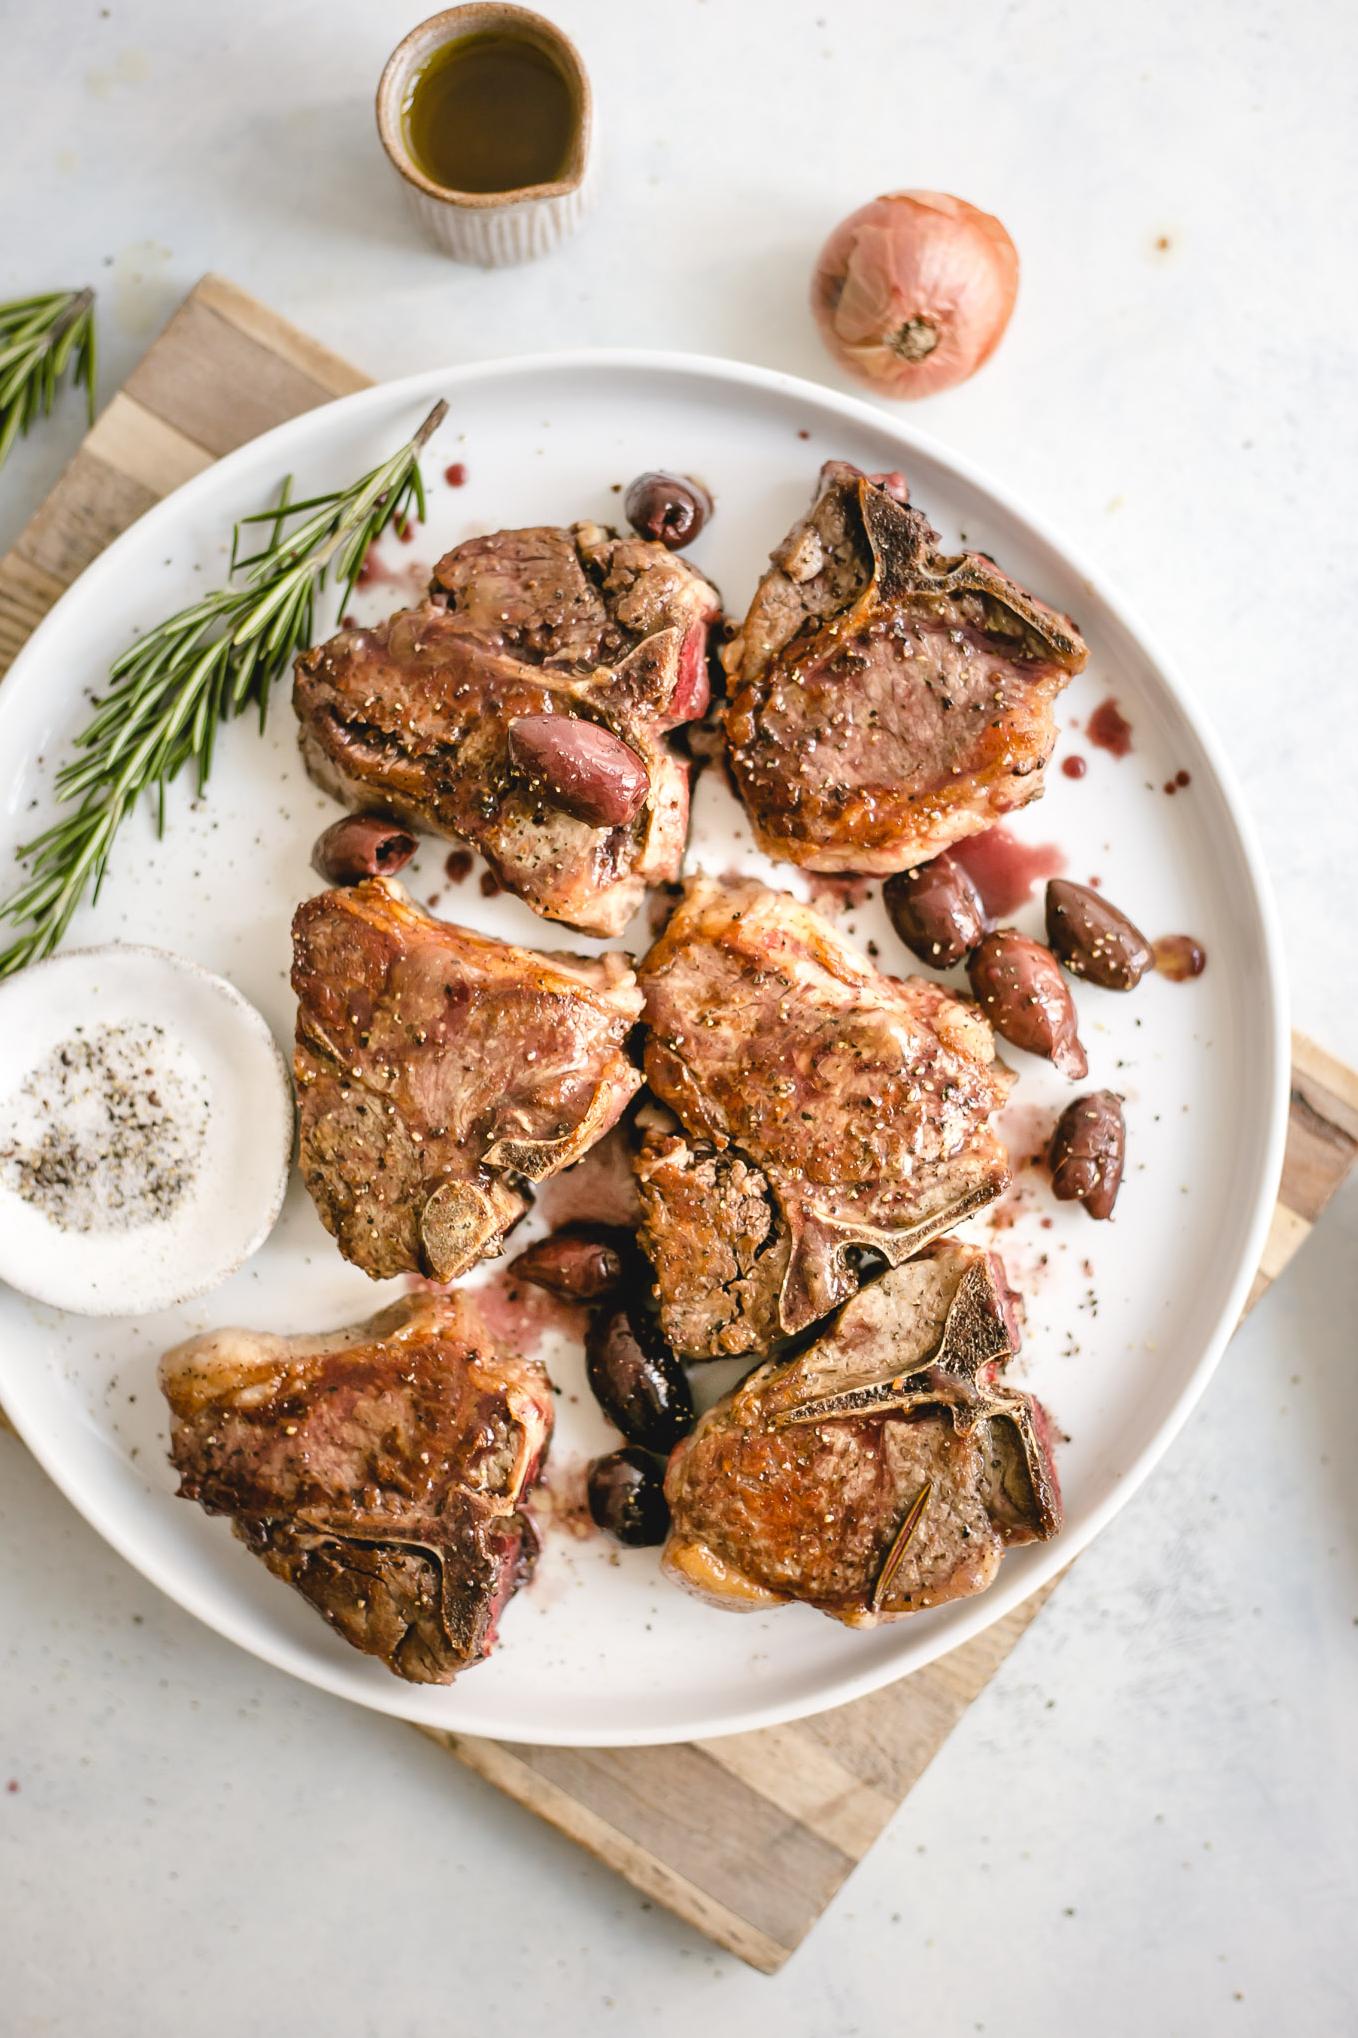  The perfect holiday feast addition - Lamb chops in red wine olive marinade